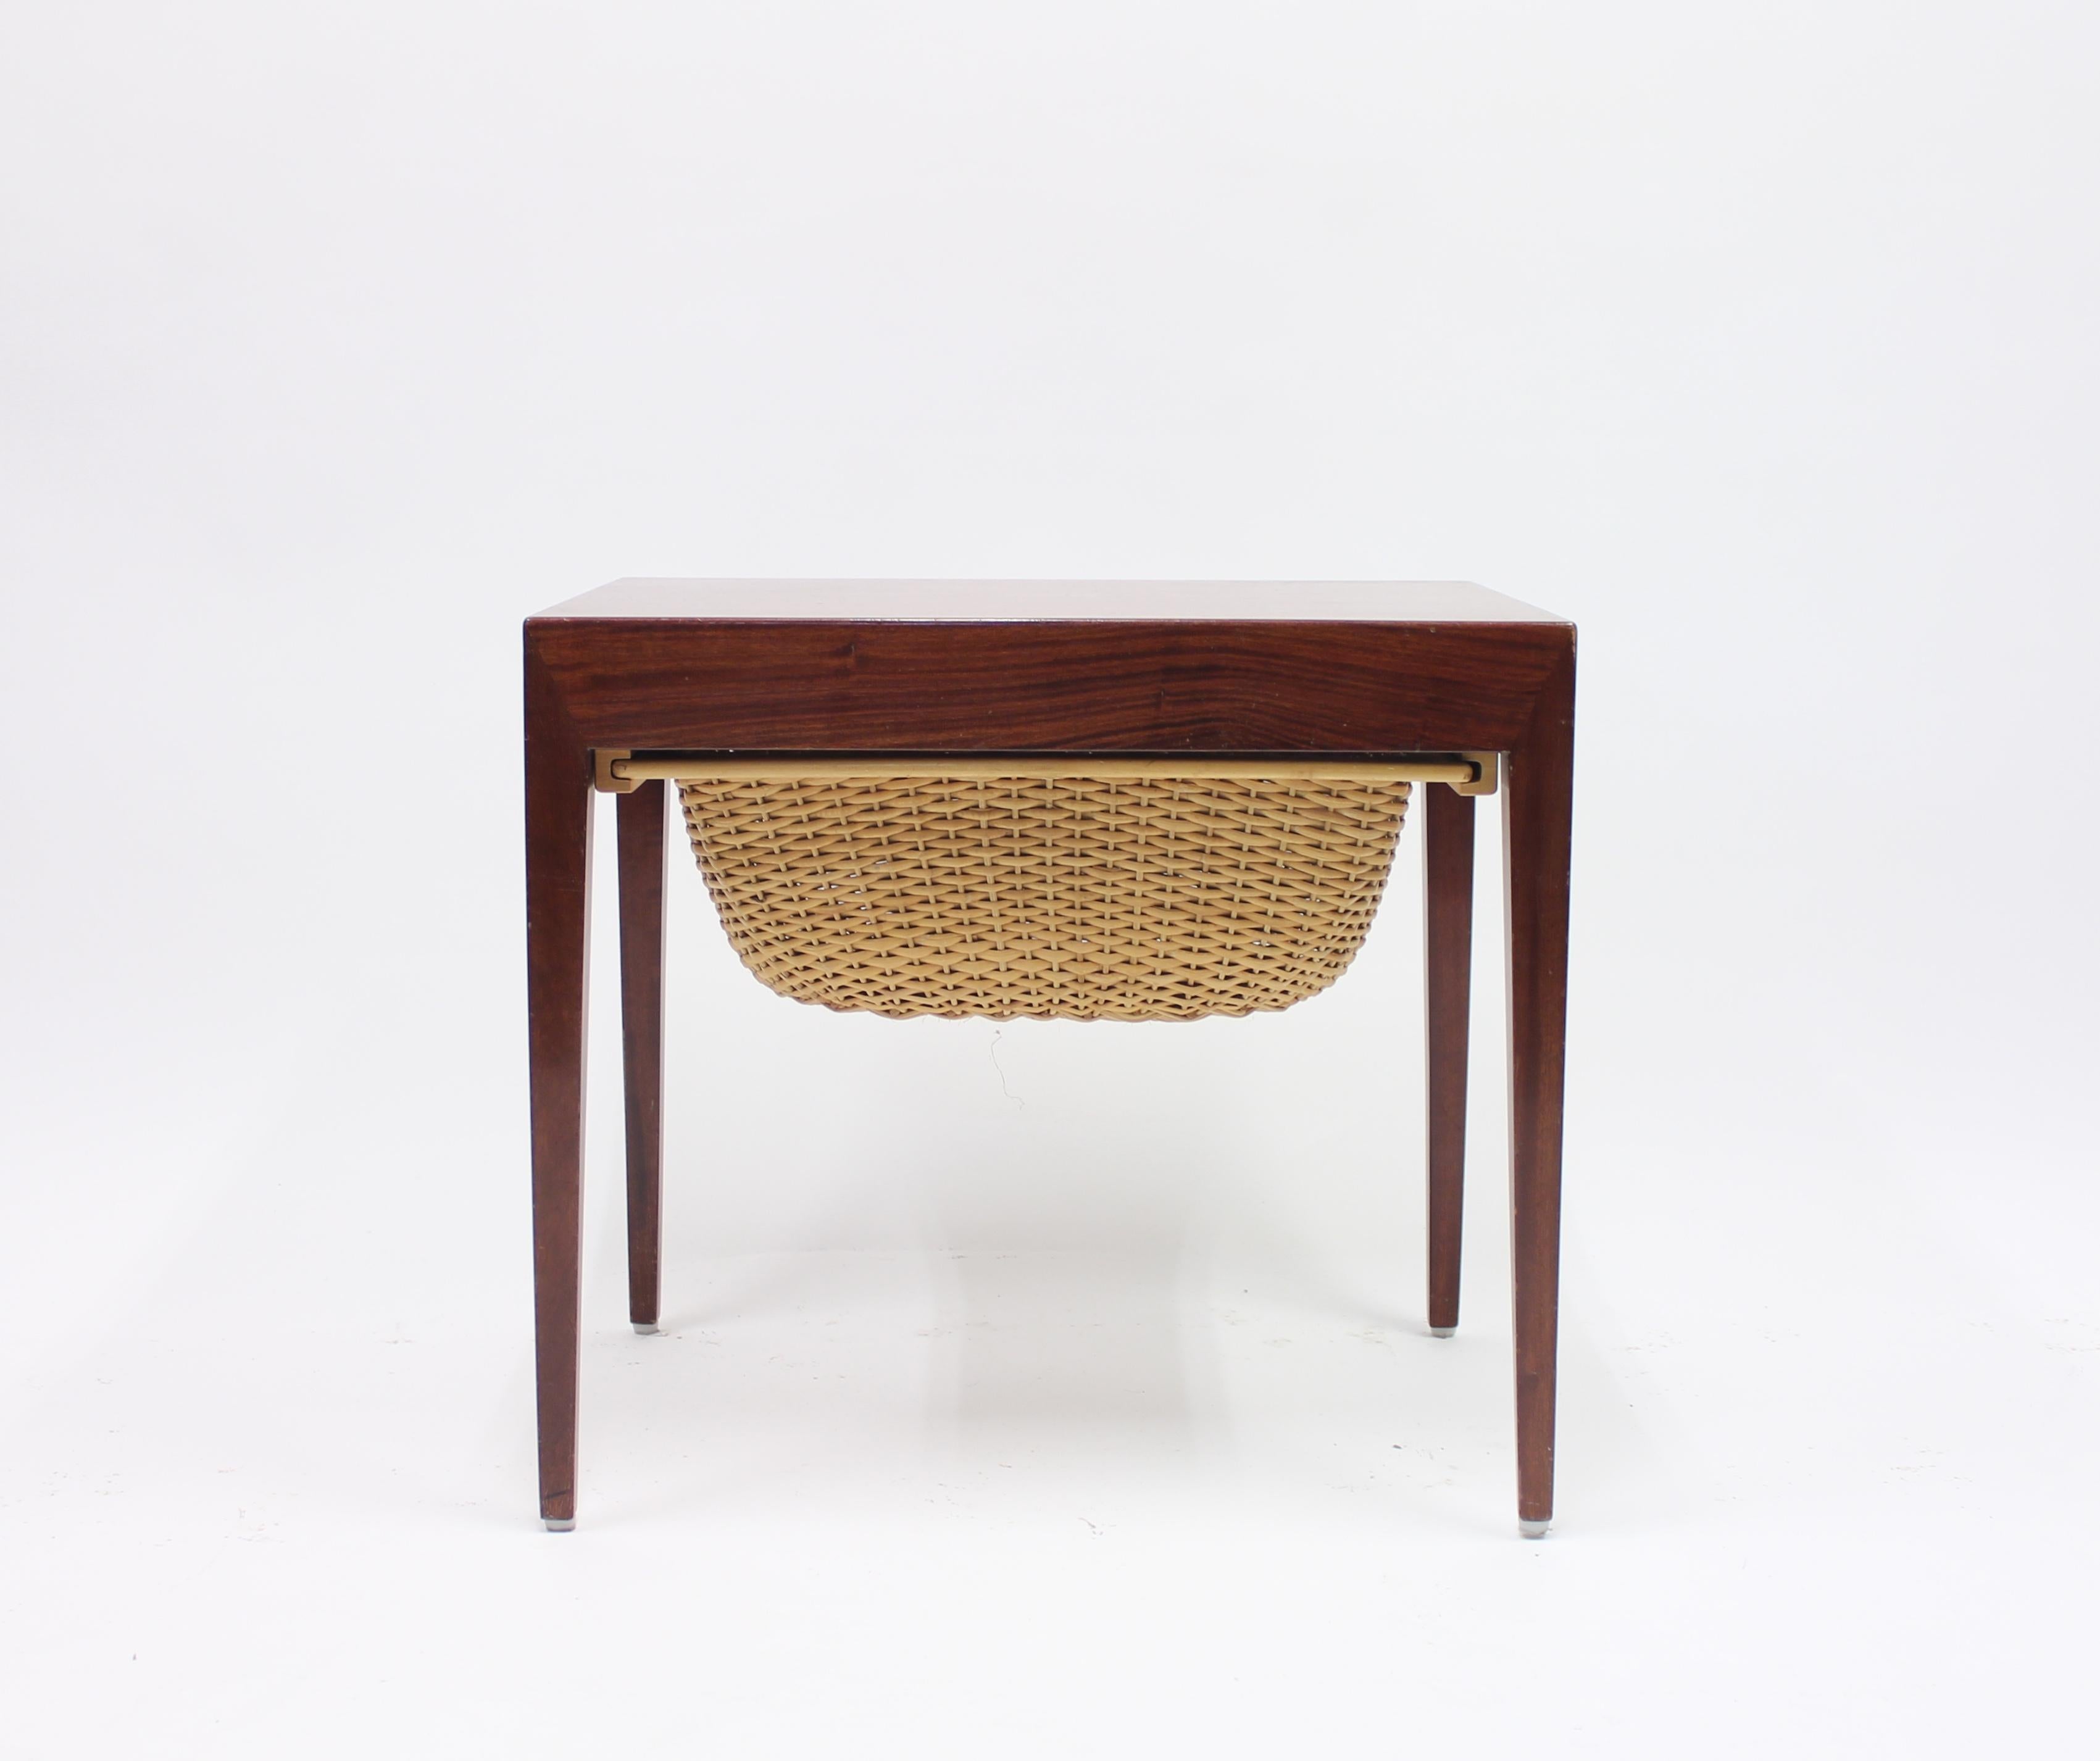 1950s rosewood sewing- or side table with rattan basket by Danish designer Severin Hansen for Haslev Møbelsnedkeri. Marked with Danish Furniture makers Control mark. Good condition with ware consistent with age and use.